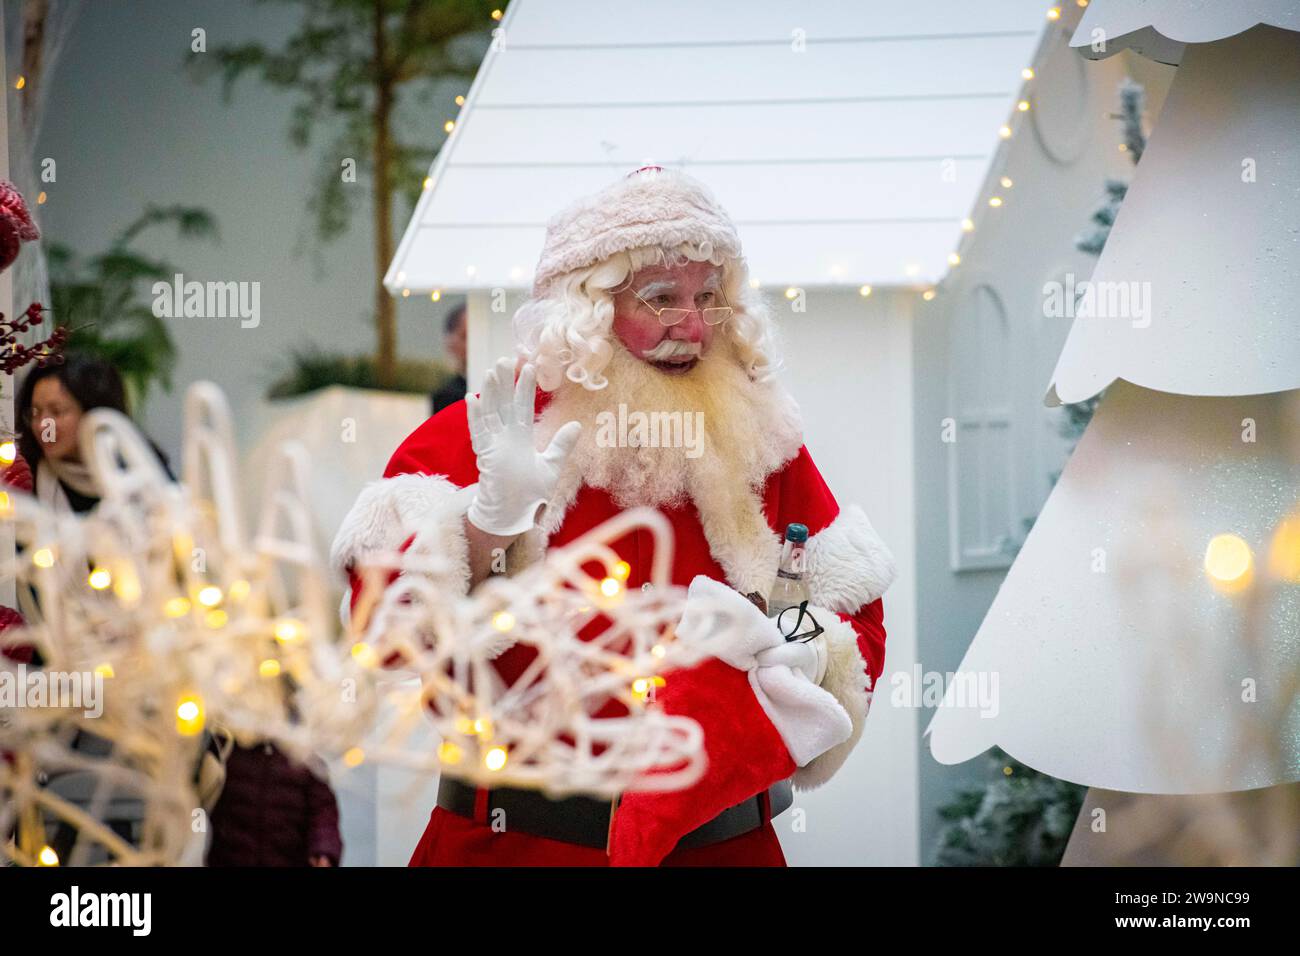 Father Christmas welcomes children at Christmas time Stock Photo